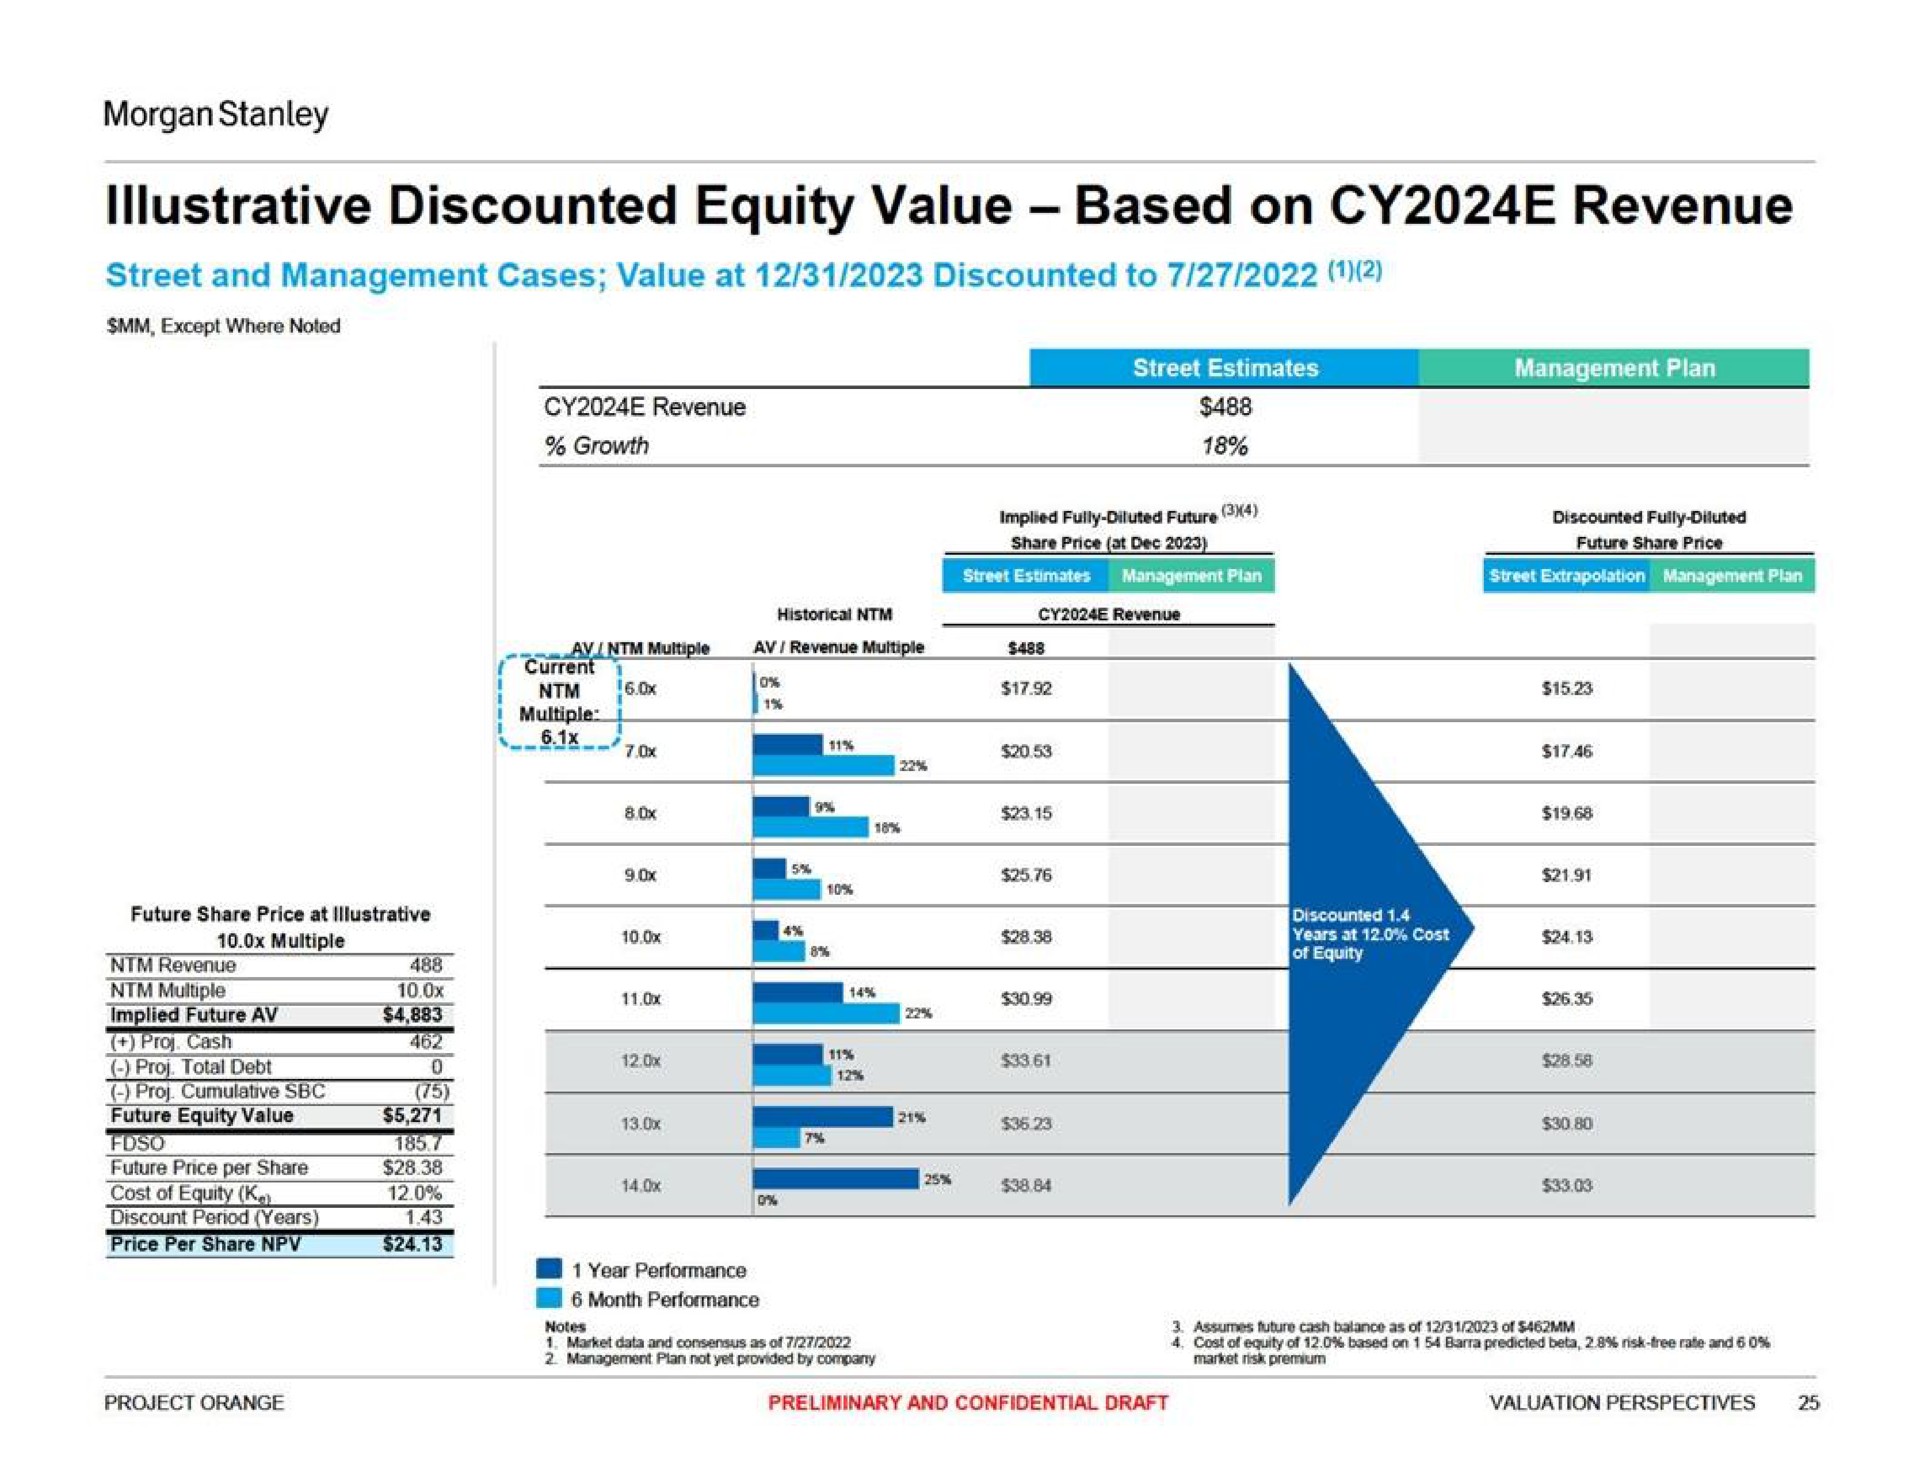 illustrative discounted equity value based on revenue | Morgan Stanley